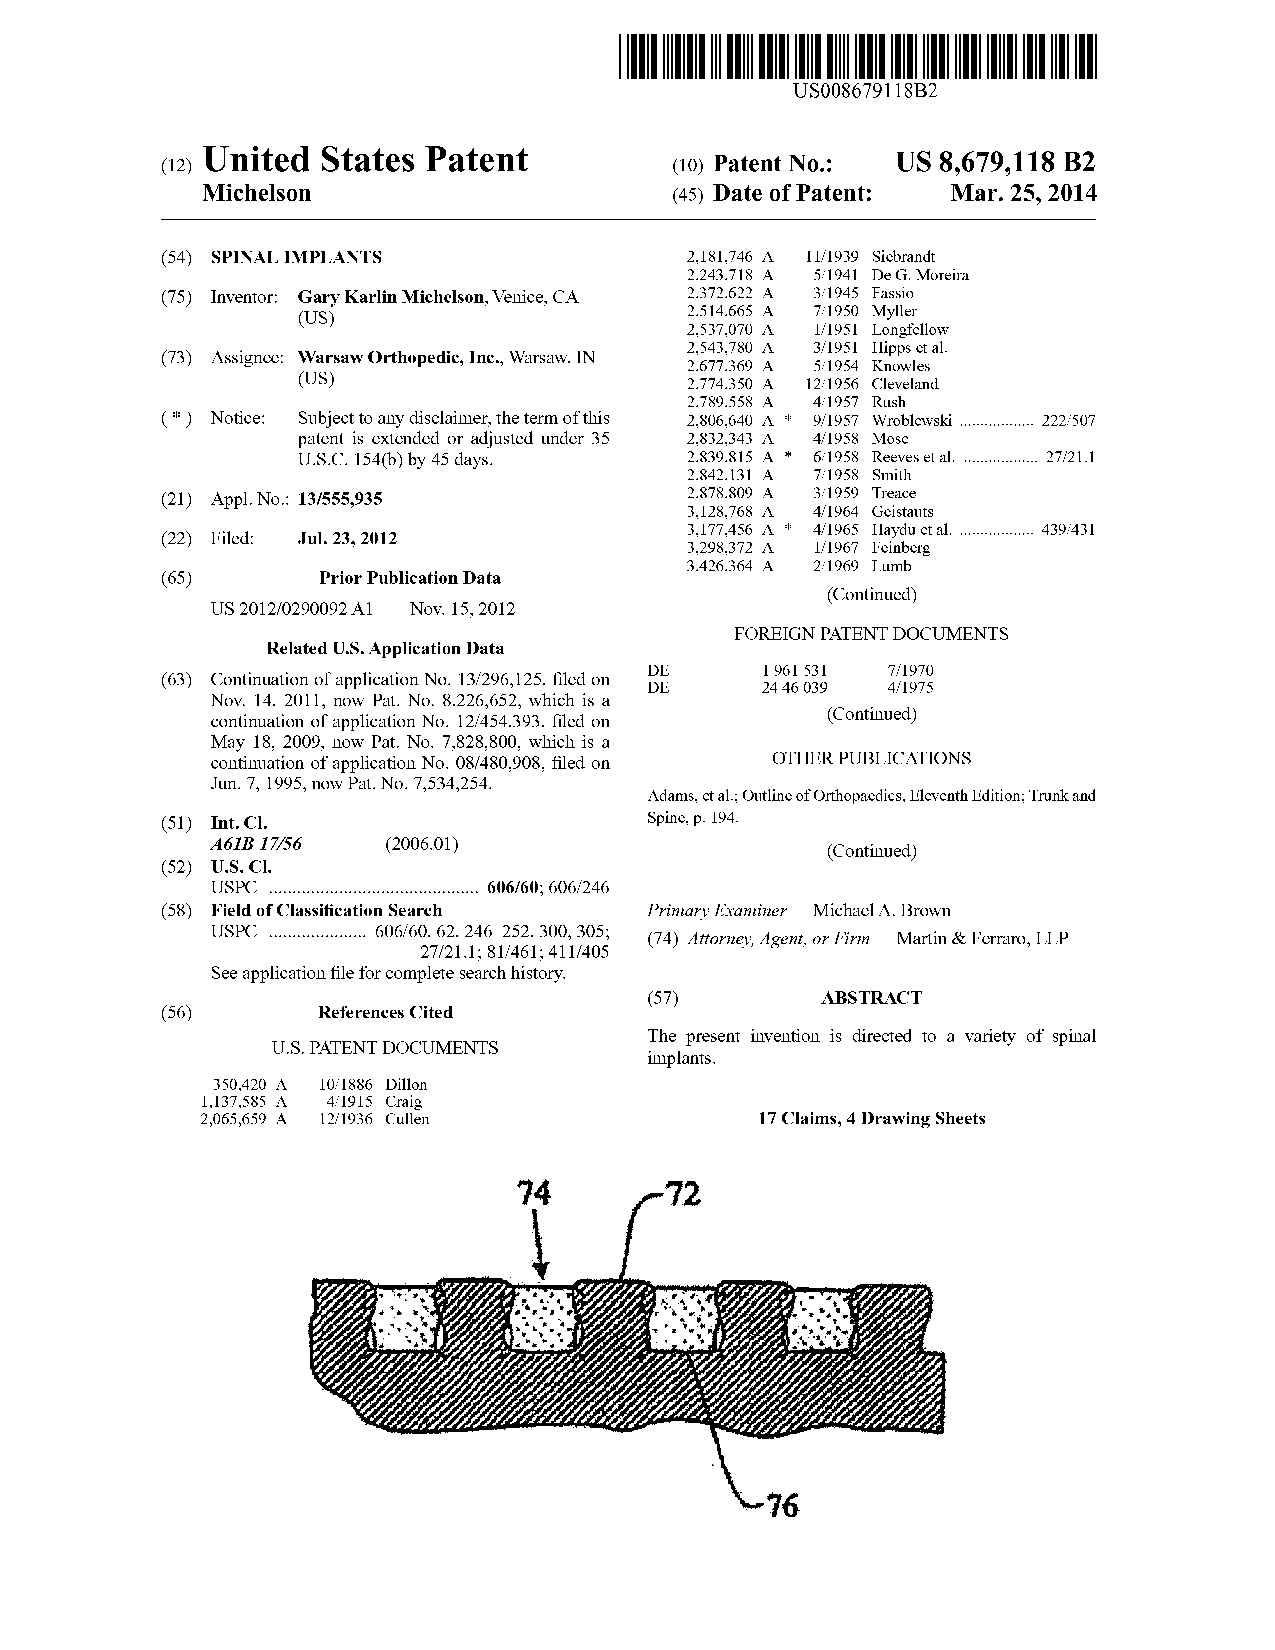 Spinal implants - Patent 8,679,118